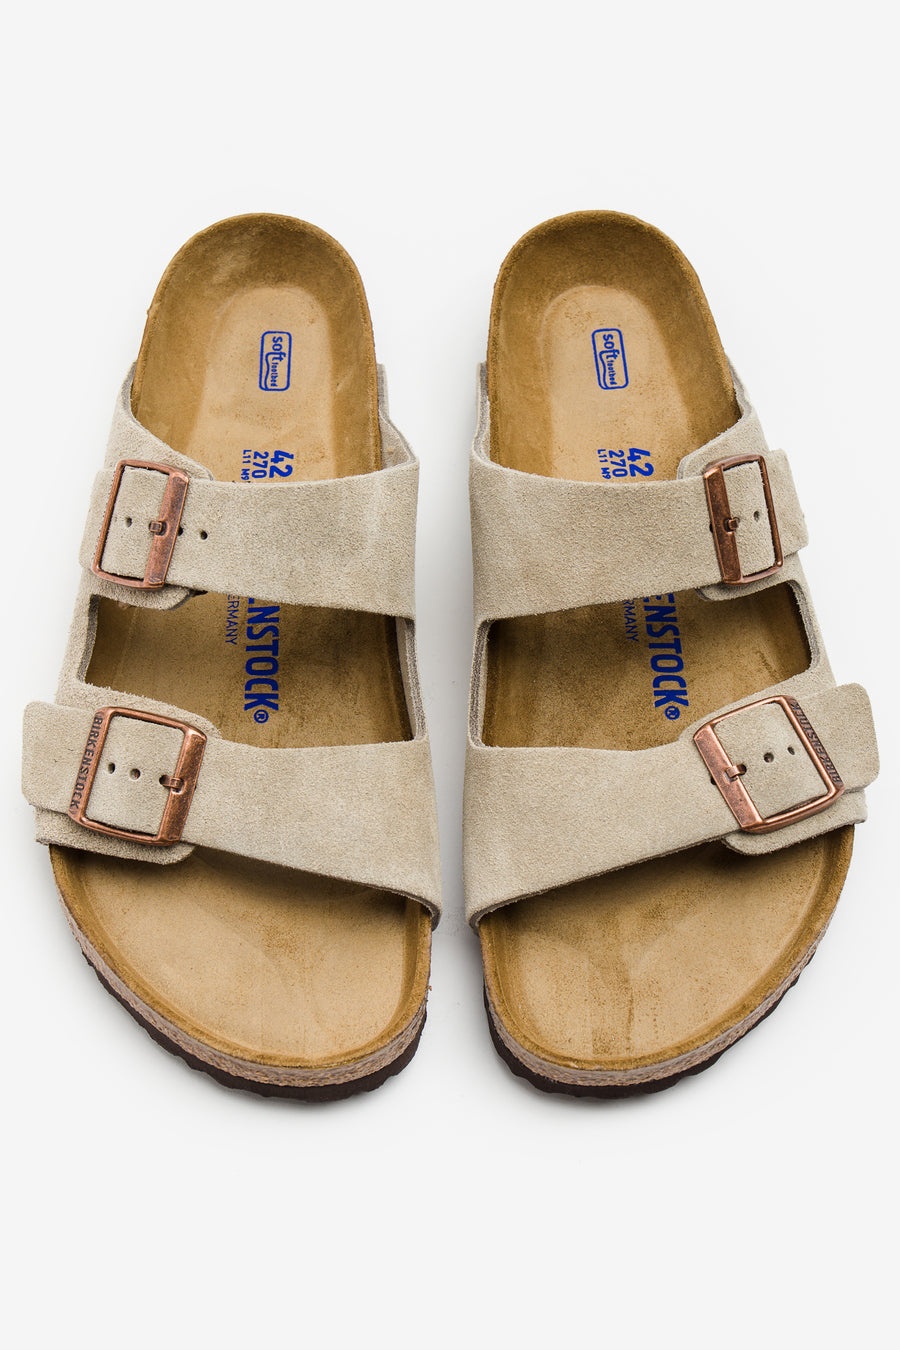 Arizona Soft Footbed Sandal in Taupe - 2